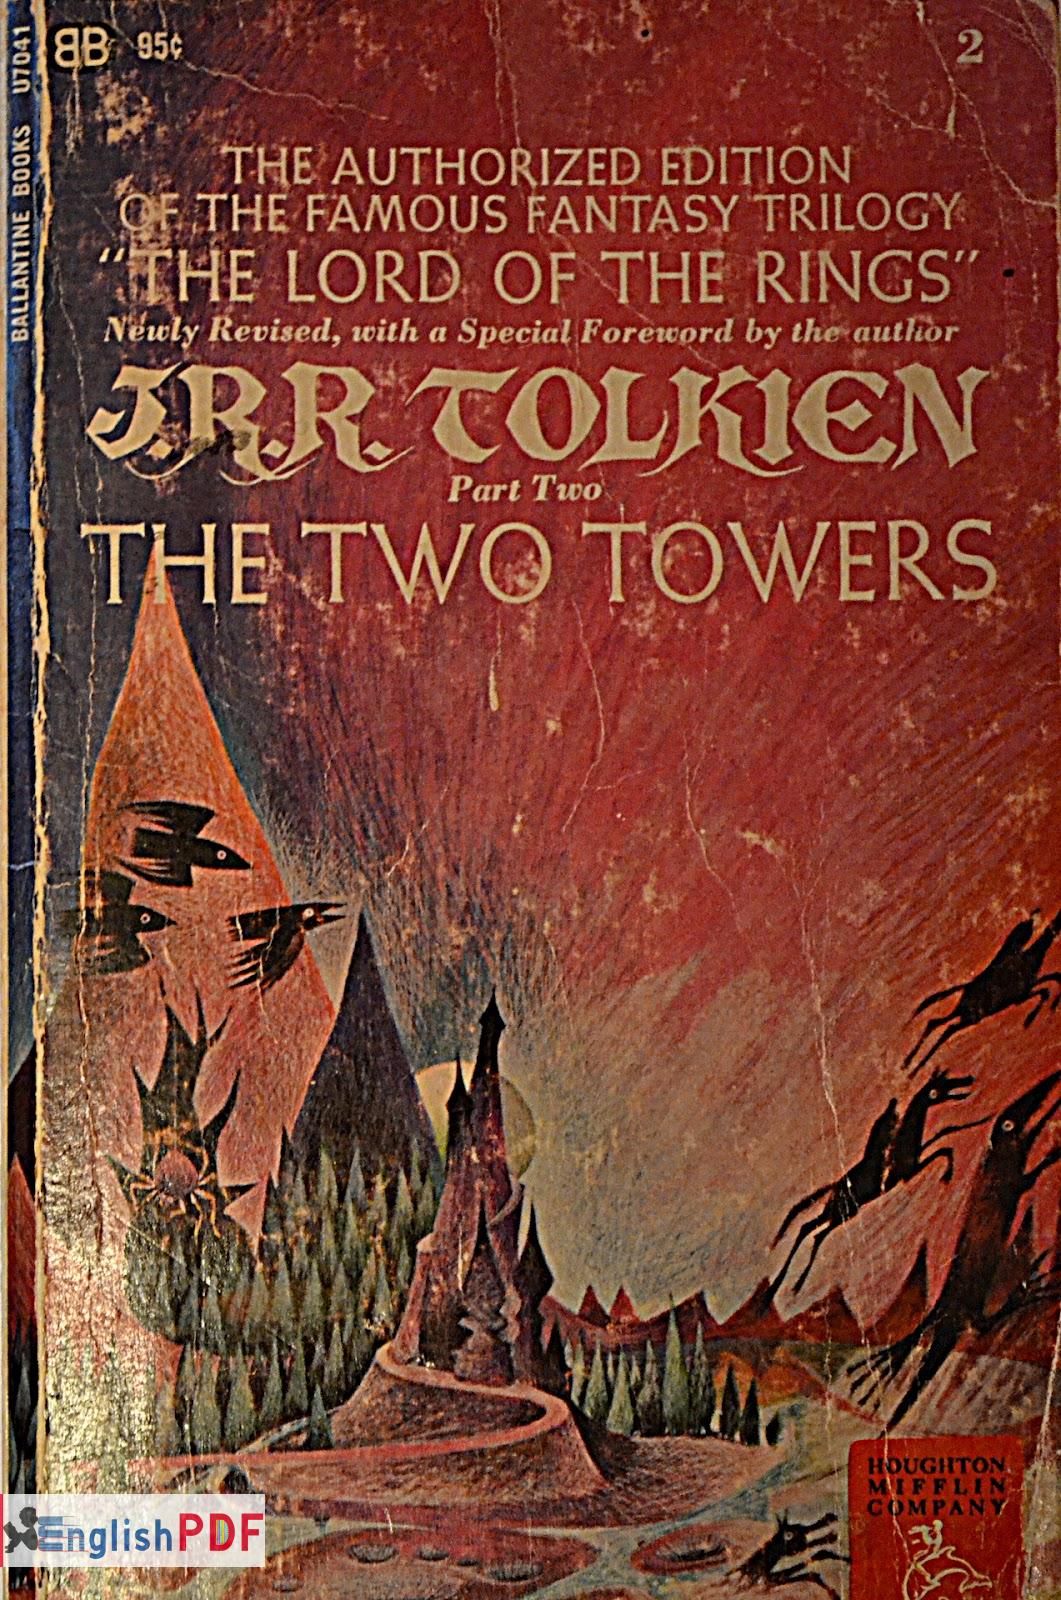 The Two Towers Book Cover 1965 Ballantyne